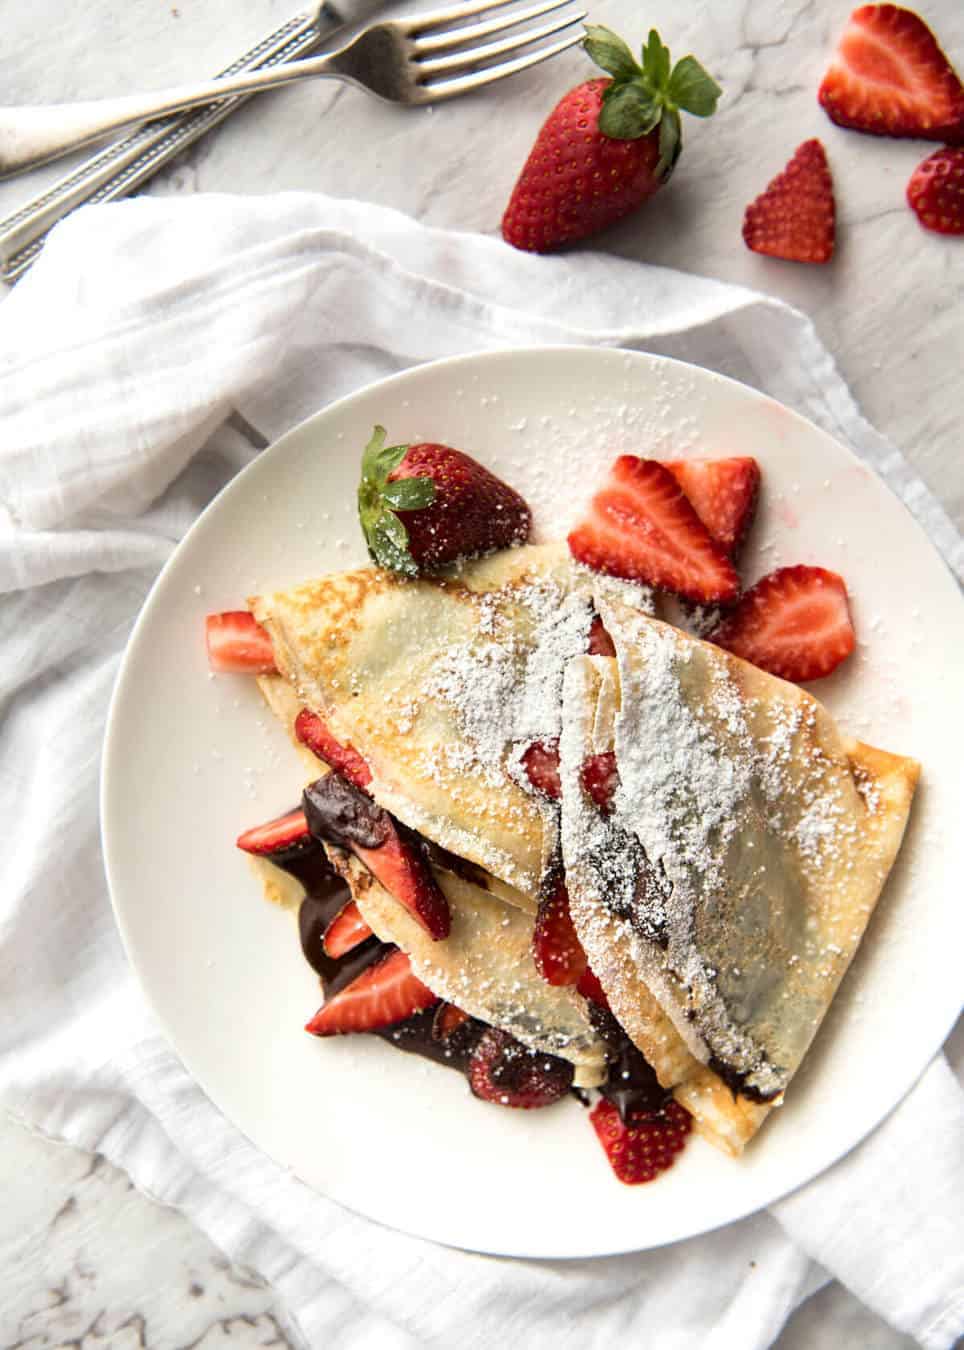 Nutella Crepes with Strawberries RecipeTin Eats